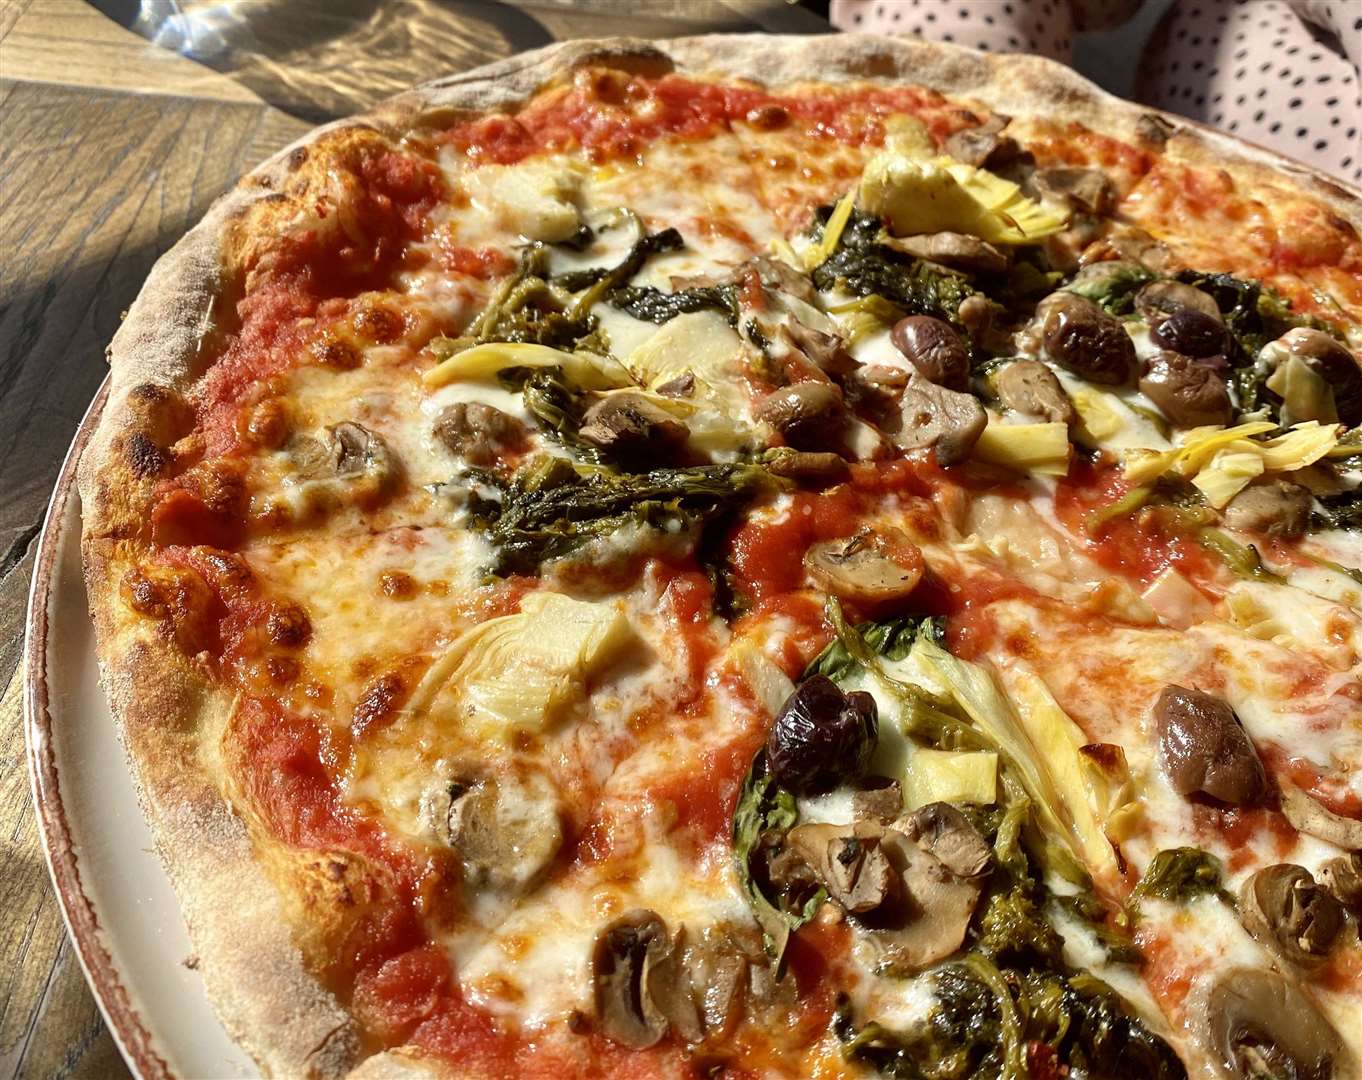 Treat yourself to a takeaway pizza from Chapter in Canterbury. Picture: Sam Lawrie